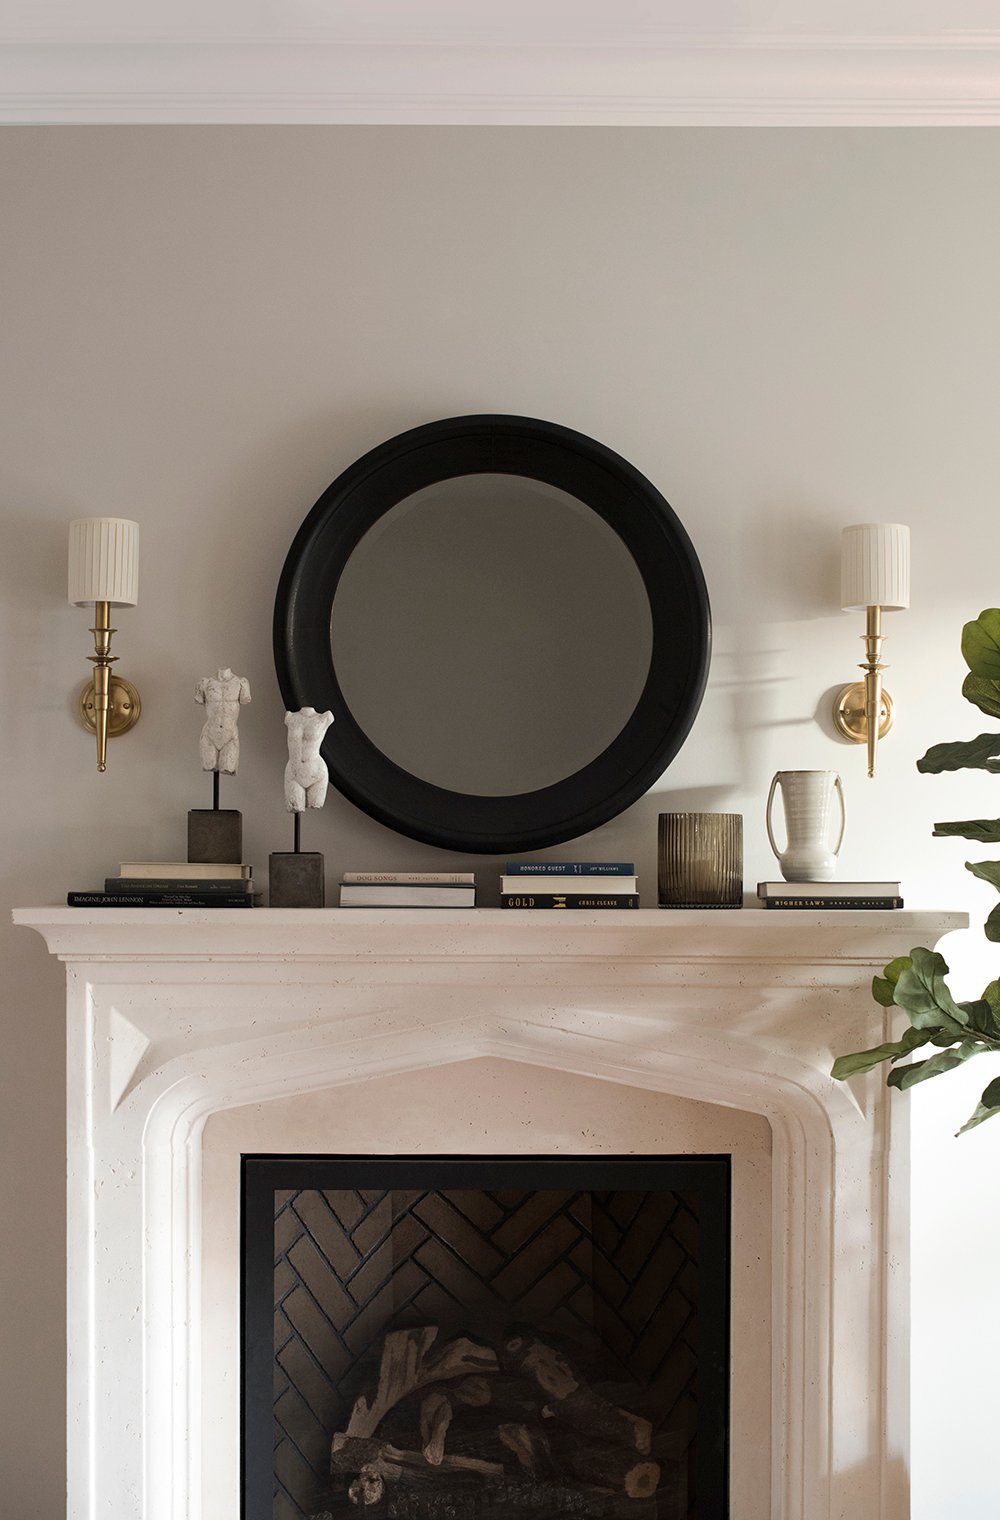 Fireplace Makeover Cast Mantel, How To Get Mantel Of Fireplace